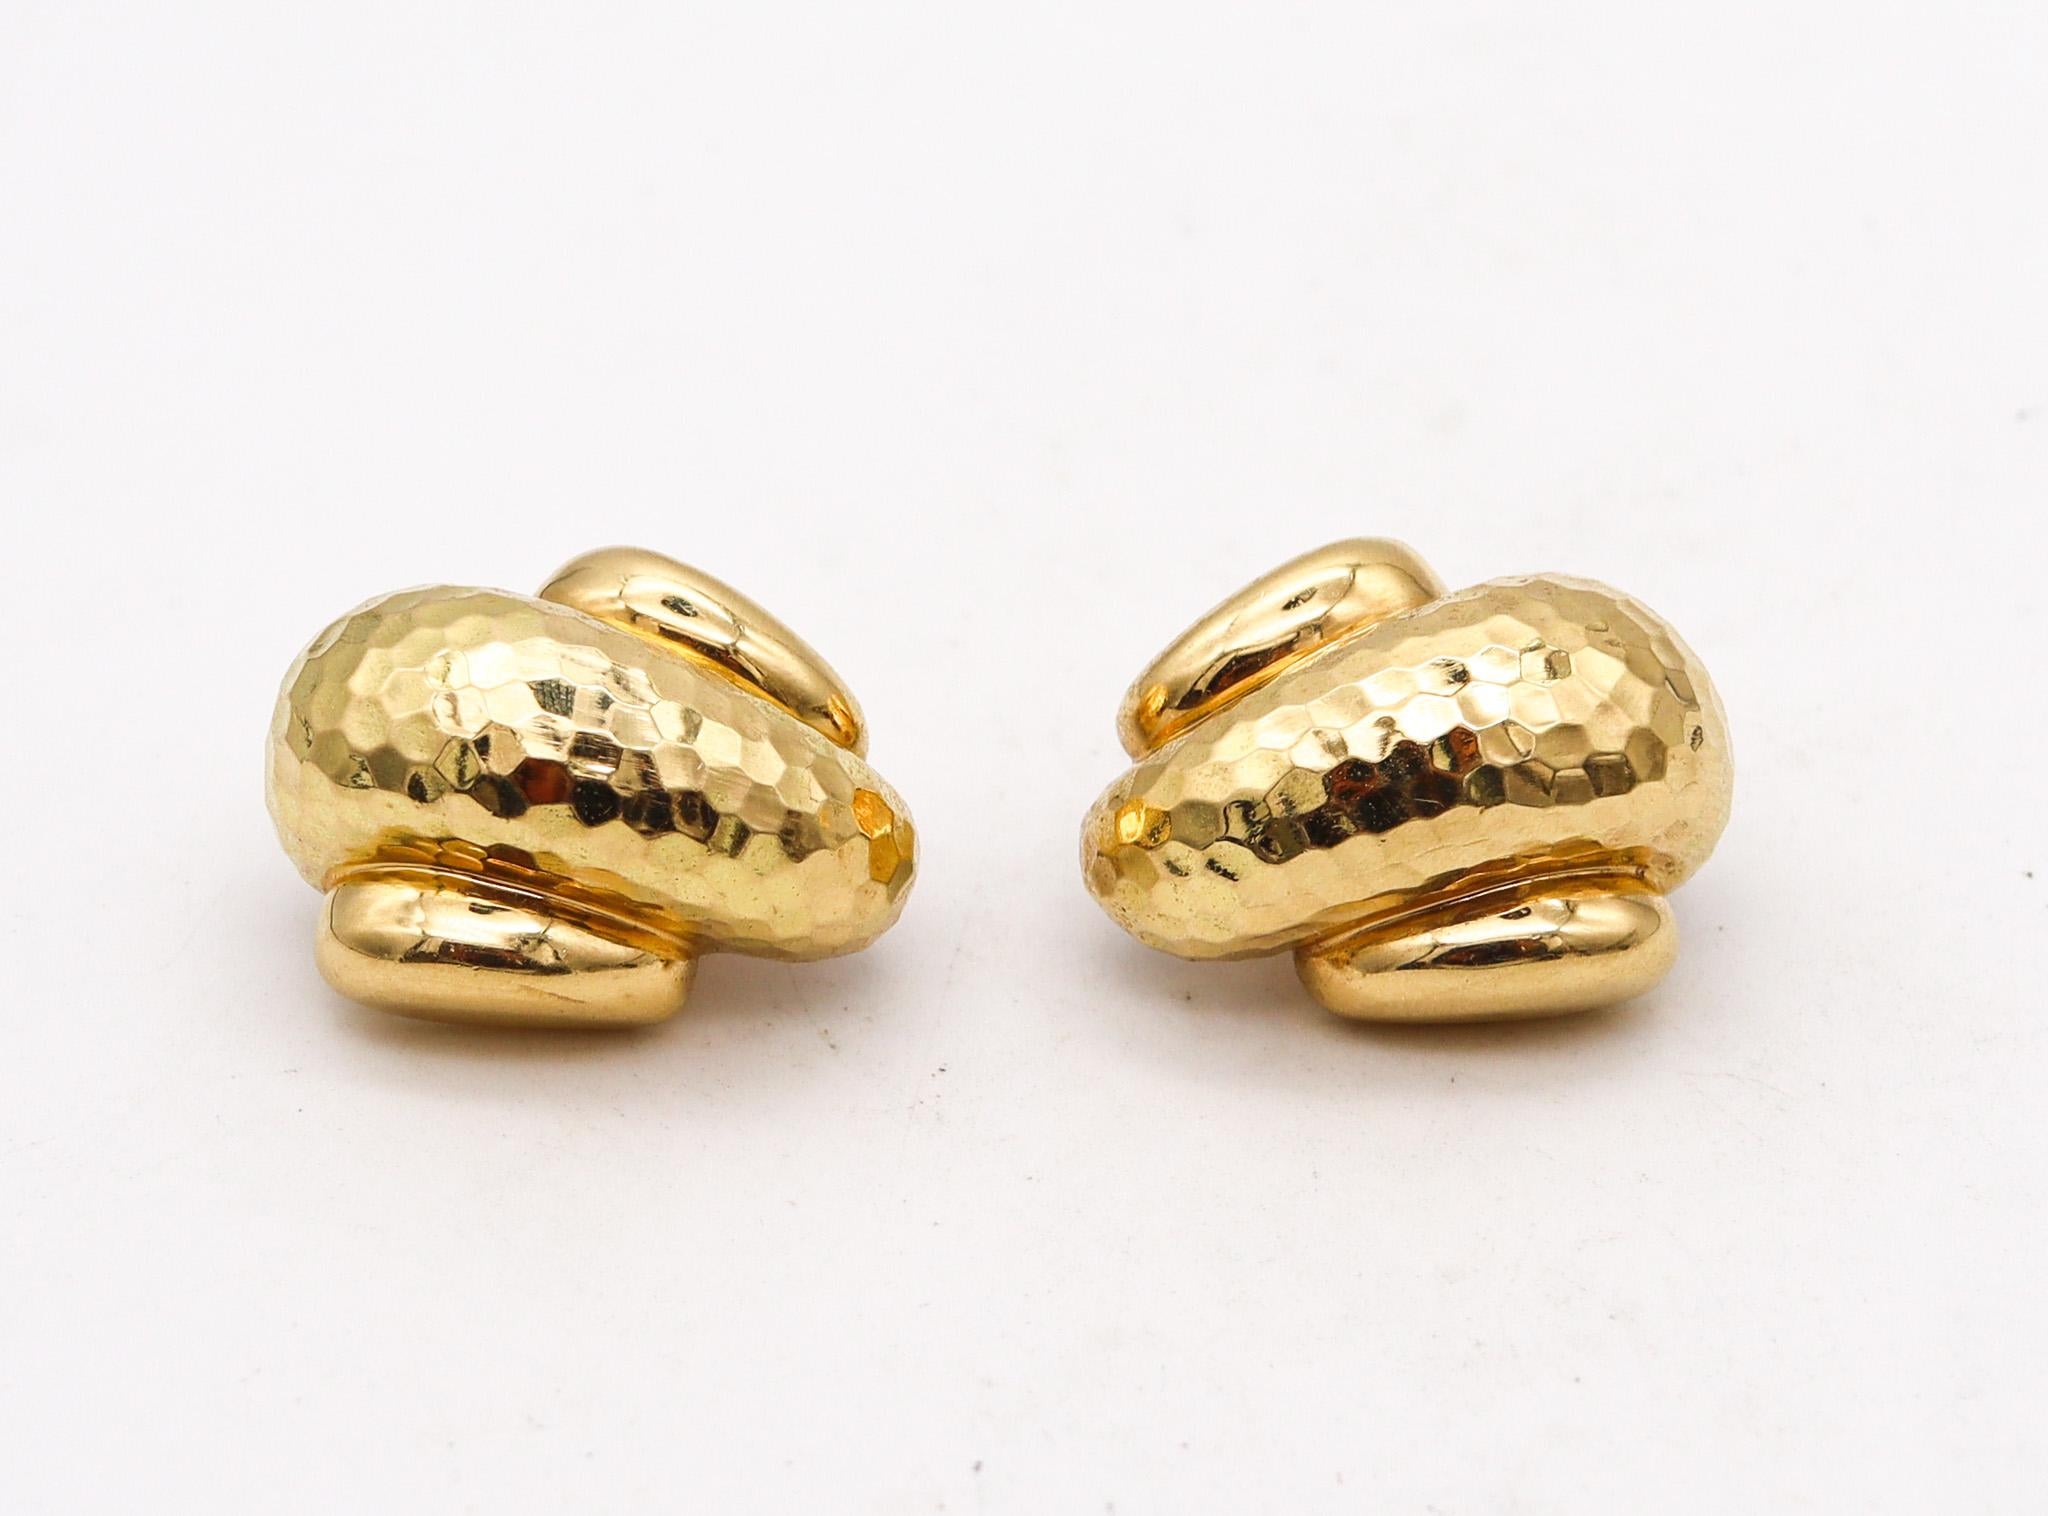 Clip on earrings designed by Andrew Clunn.

An statement pair of earrings, created in New York city at the jewelry atelier of Andrew Clunn. These earrings has been crafted with hammered patterns in solid rich yellow gold of 18 karats with high